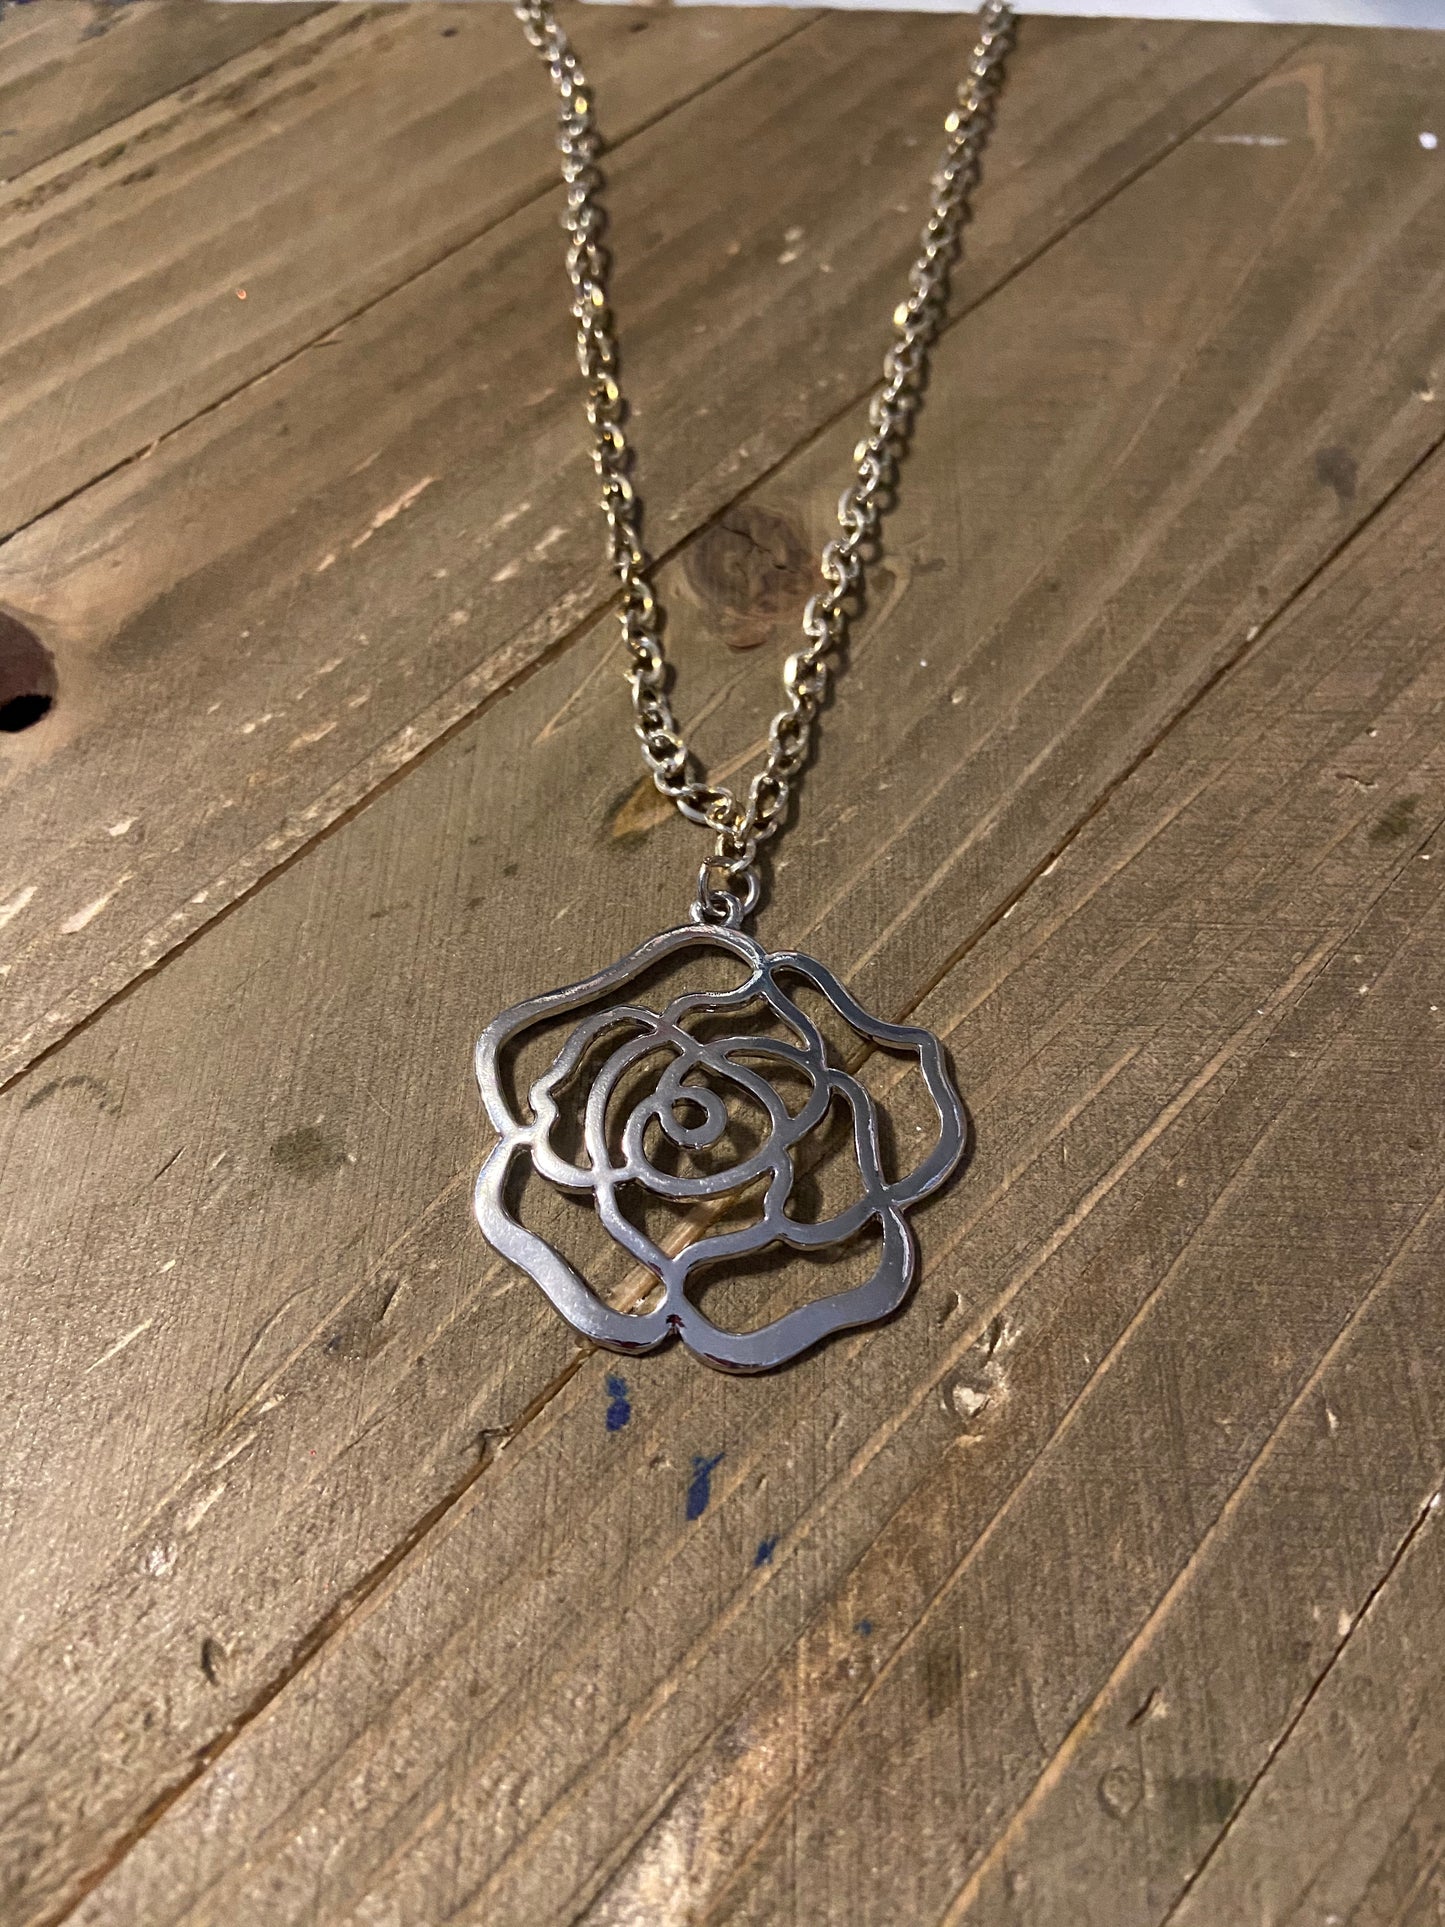 Silver Chain Necklace with A Rose outline PendantPink tiful of LOVE